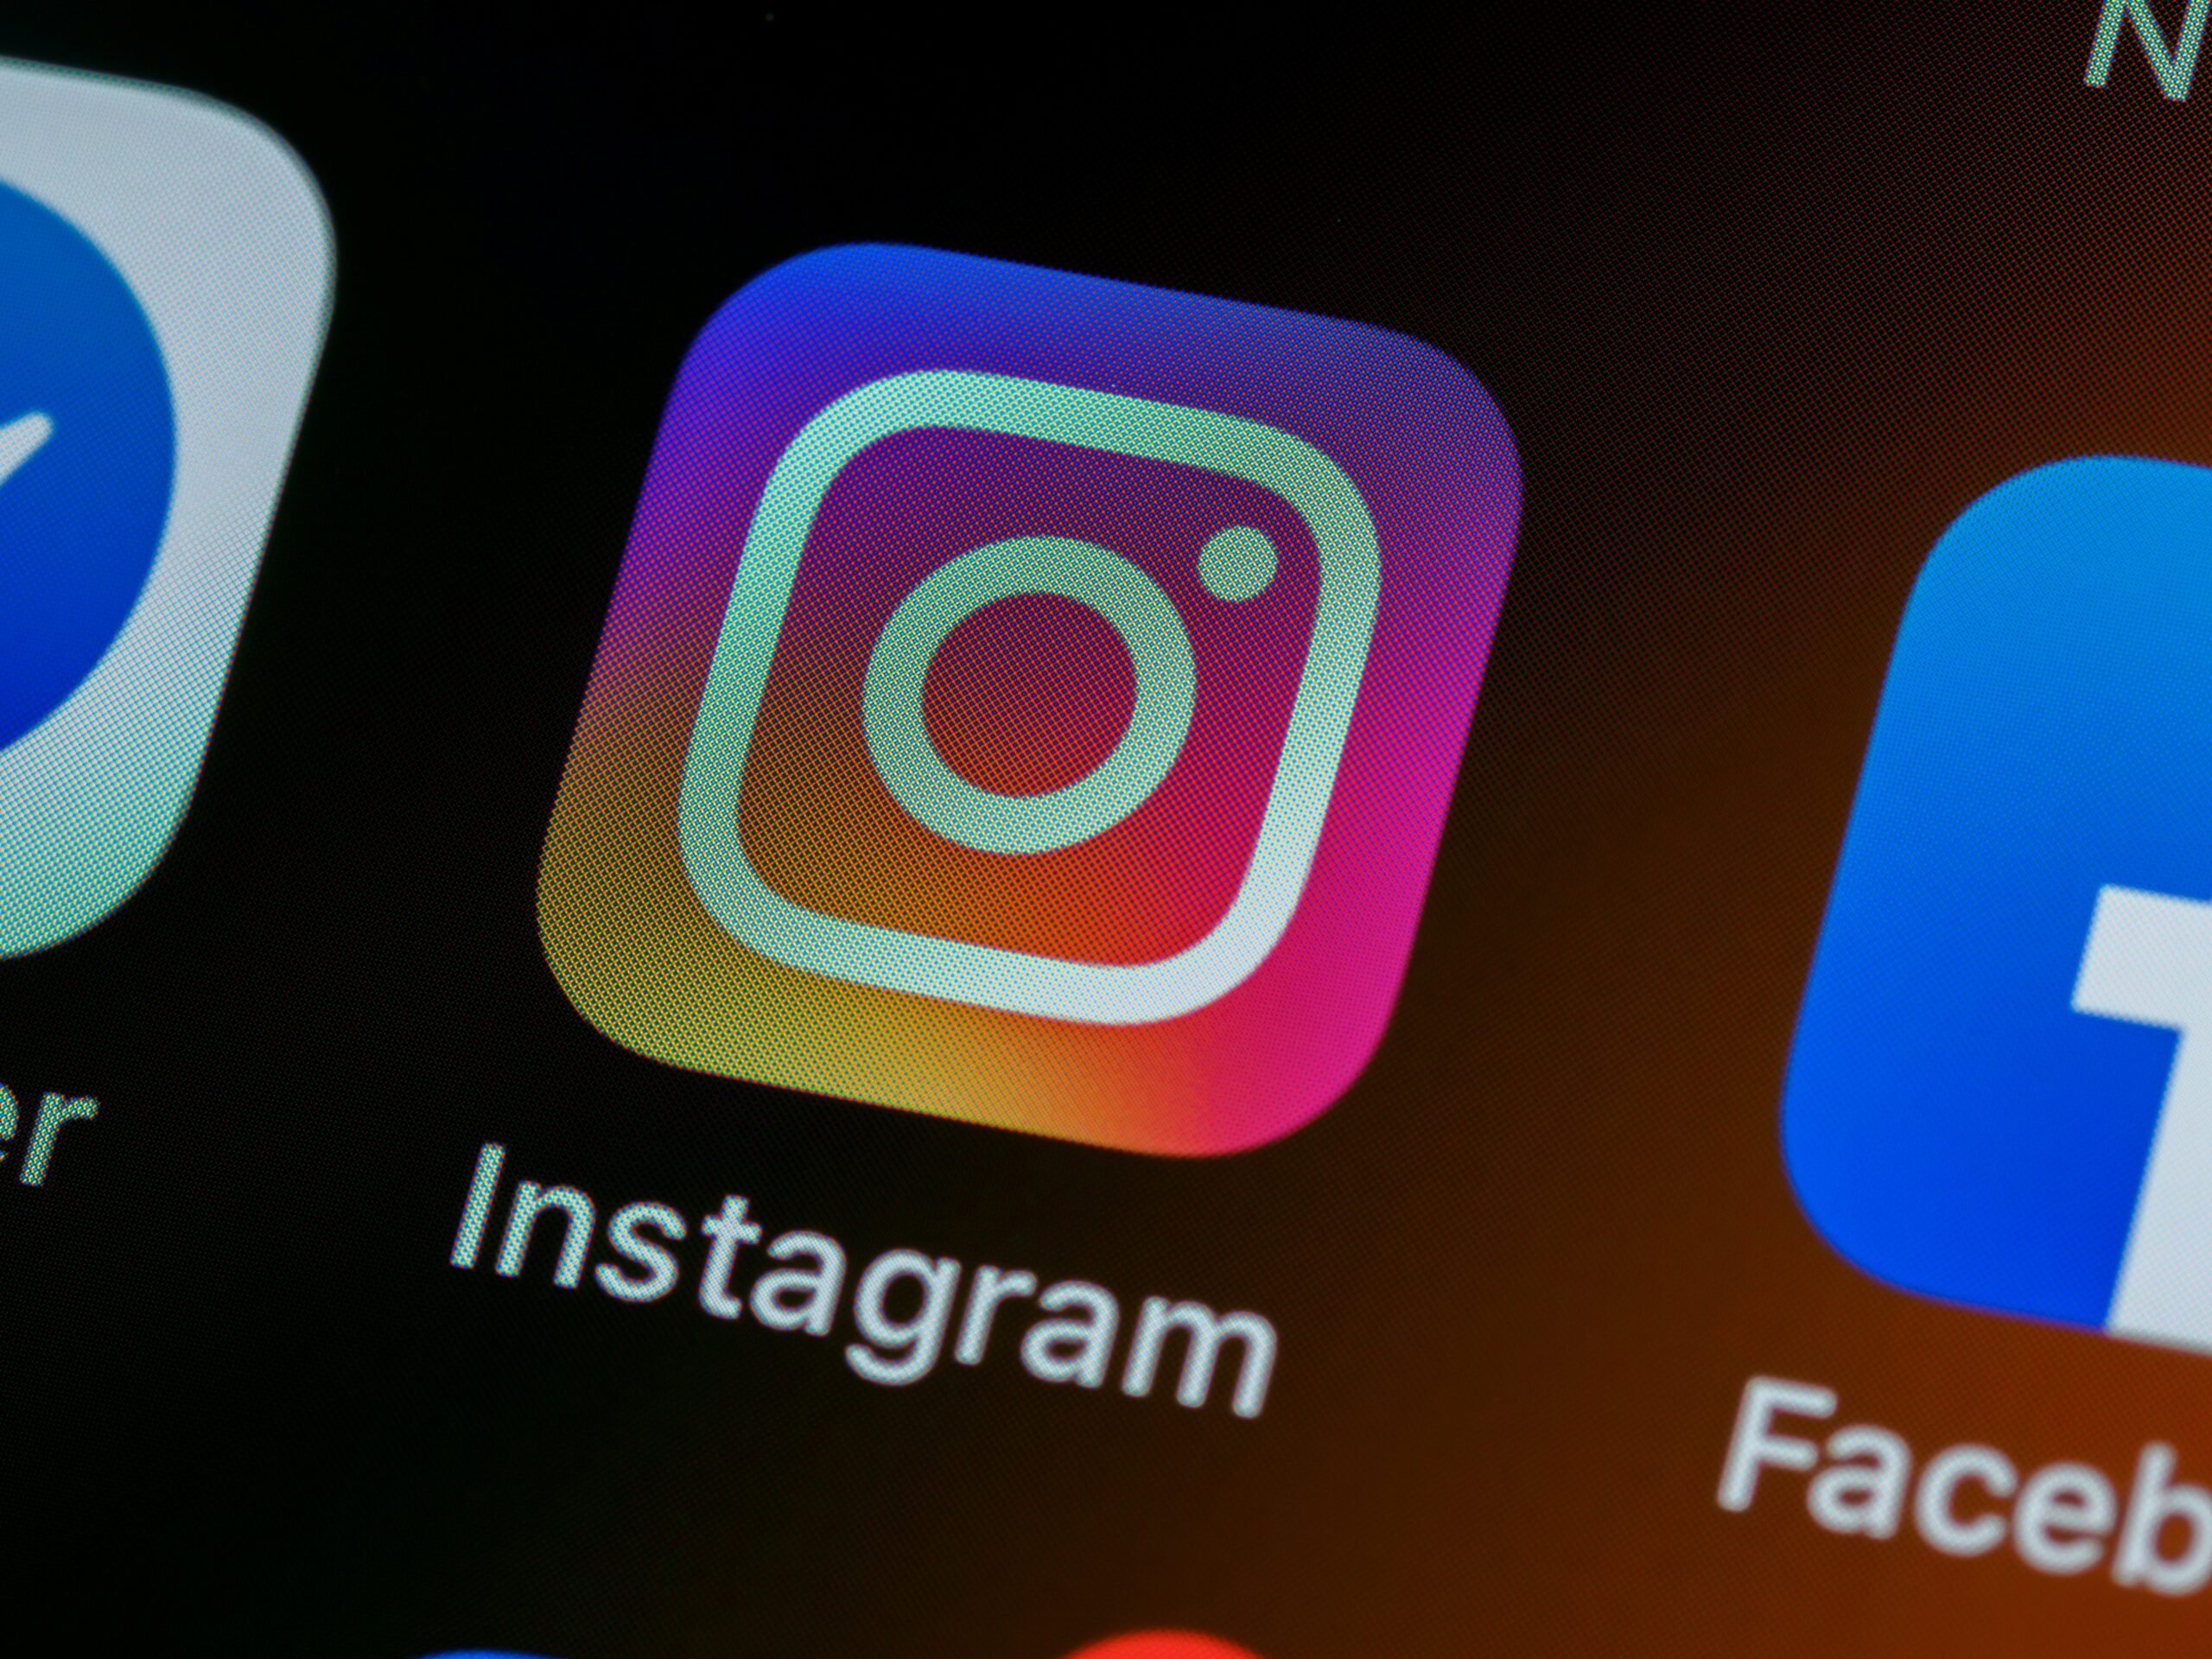 You are currently viewing Instagram Updates and how it might affect your business